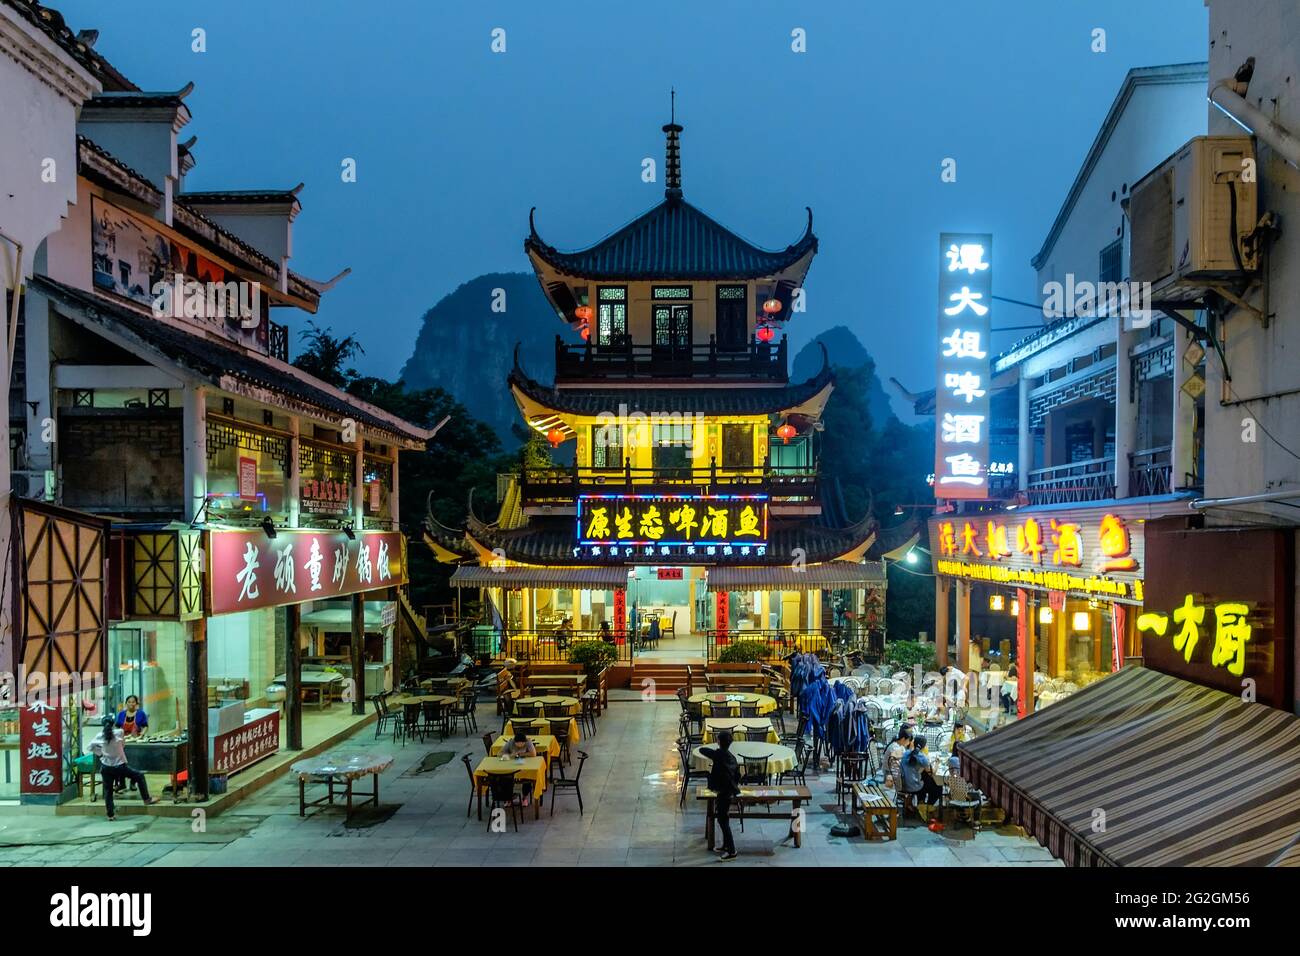 Night view of a square with table and chairs surrounded by illuminated traditional Chinese restaurants against a mountain backdrop, Yangshou, China Stock Photo